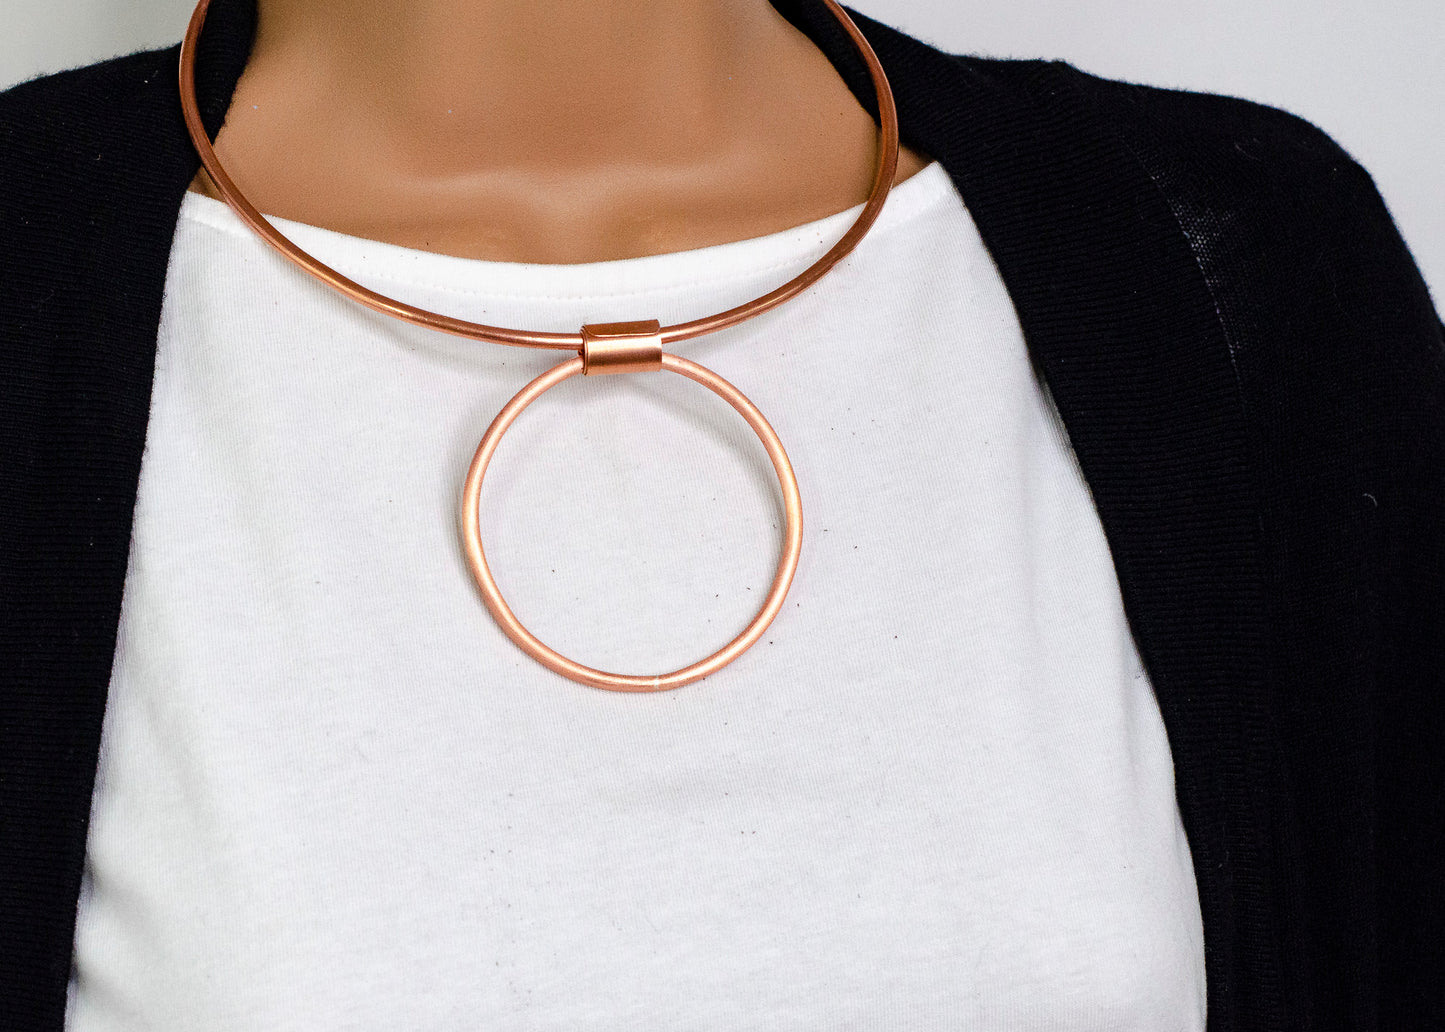 Totality Necklace